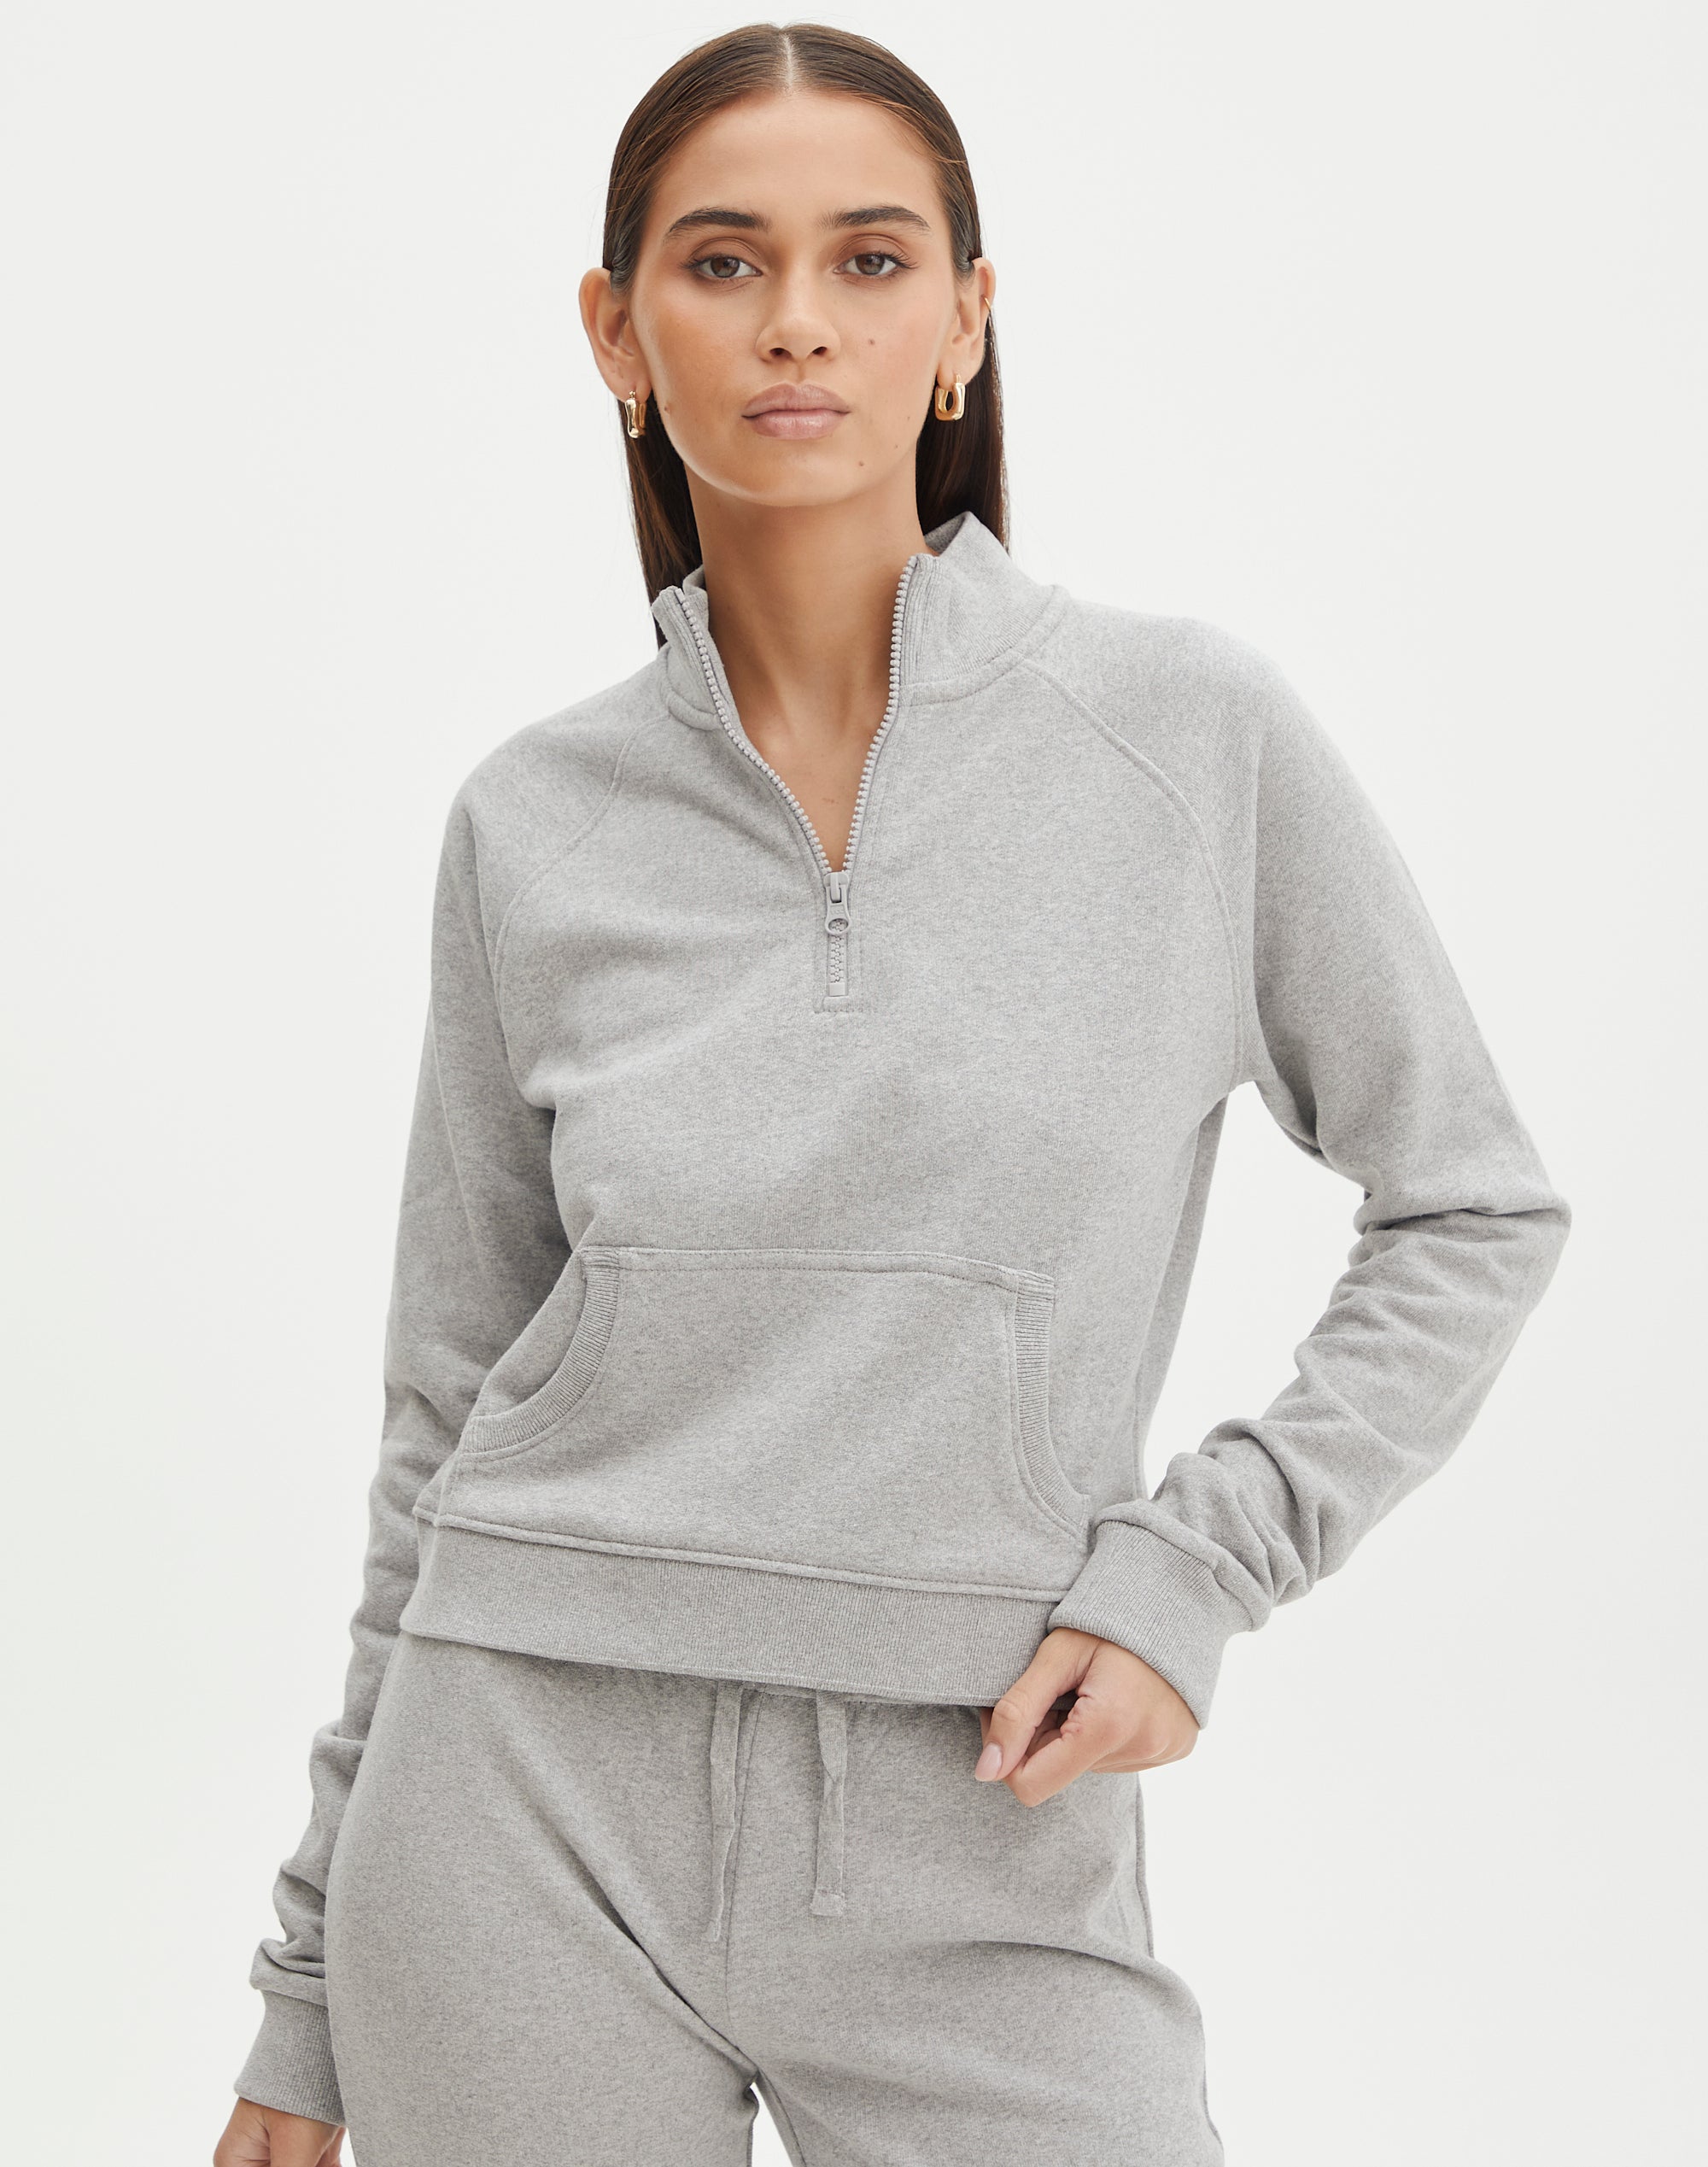 https://www.glassons.com/content/products/co-tash-long-sleeve-zip-top-pale-grey-marle-front-tl145596cot.jpg